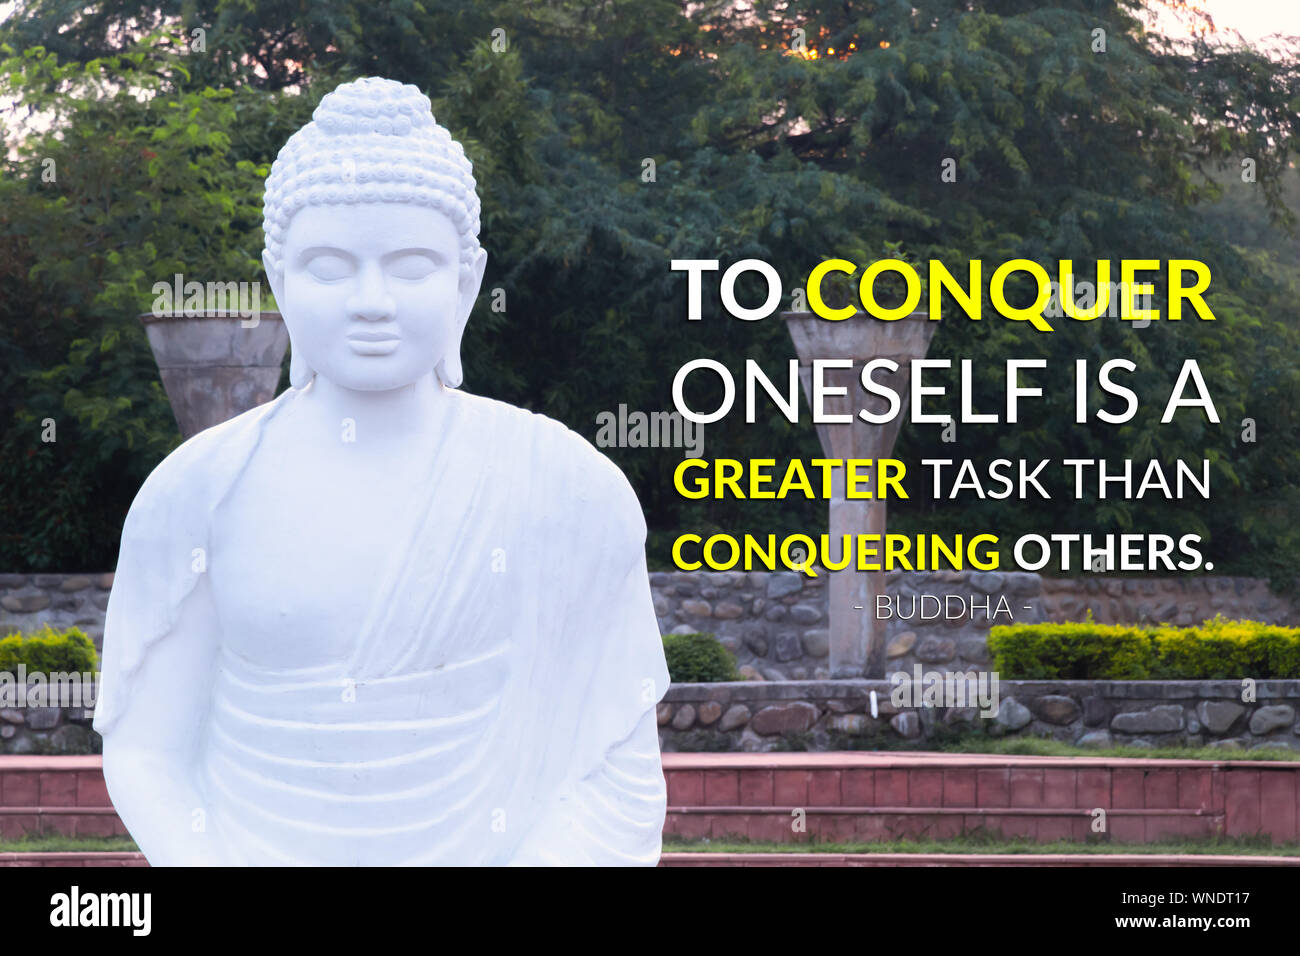 To conquer oneself is a greater task than conquering others - buddha Stock Photo